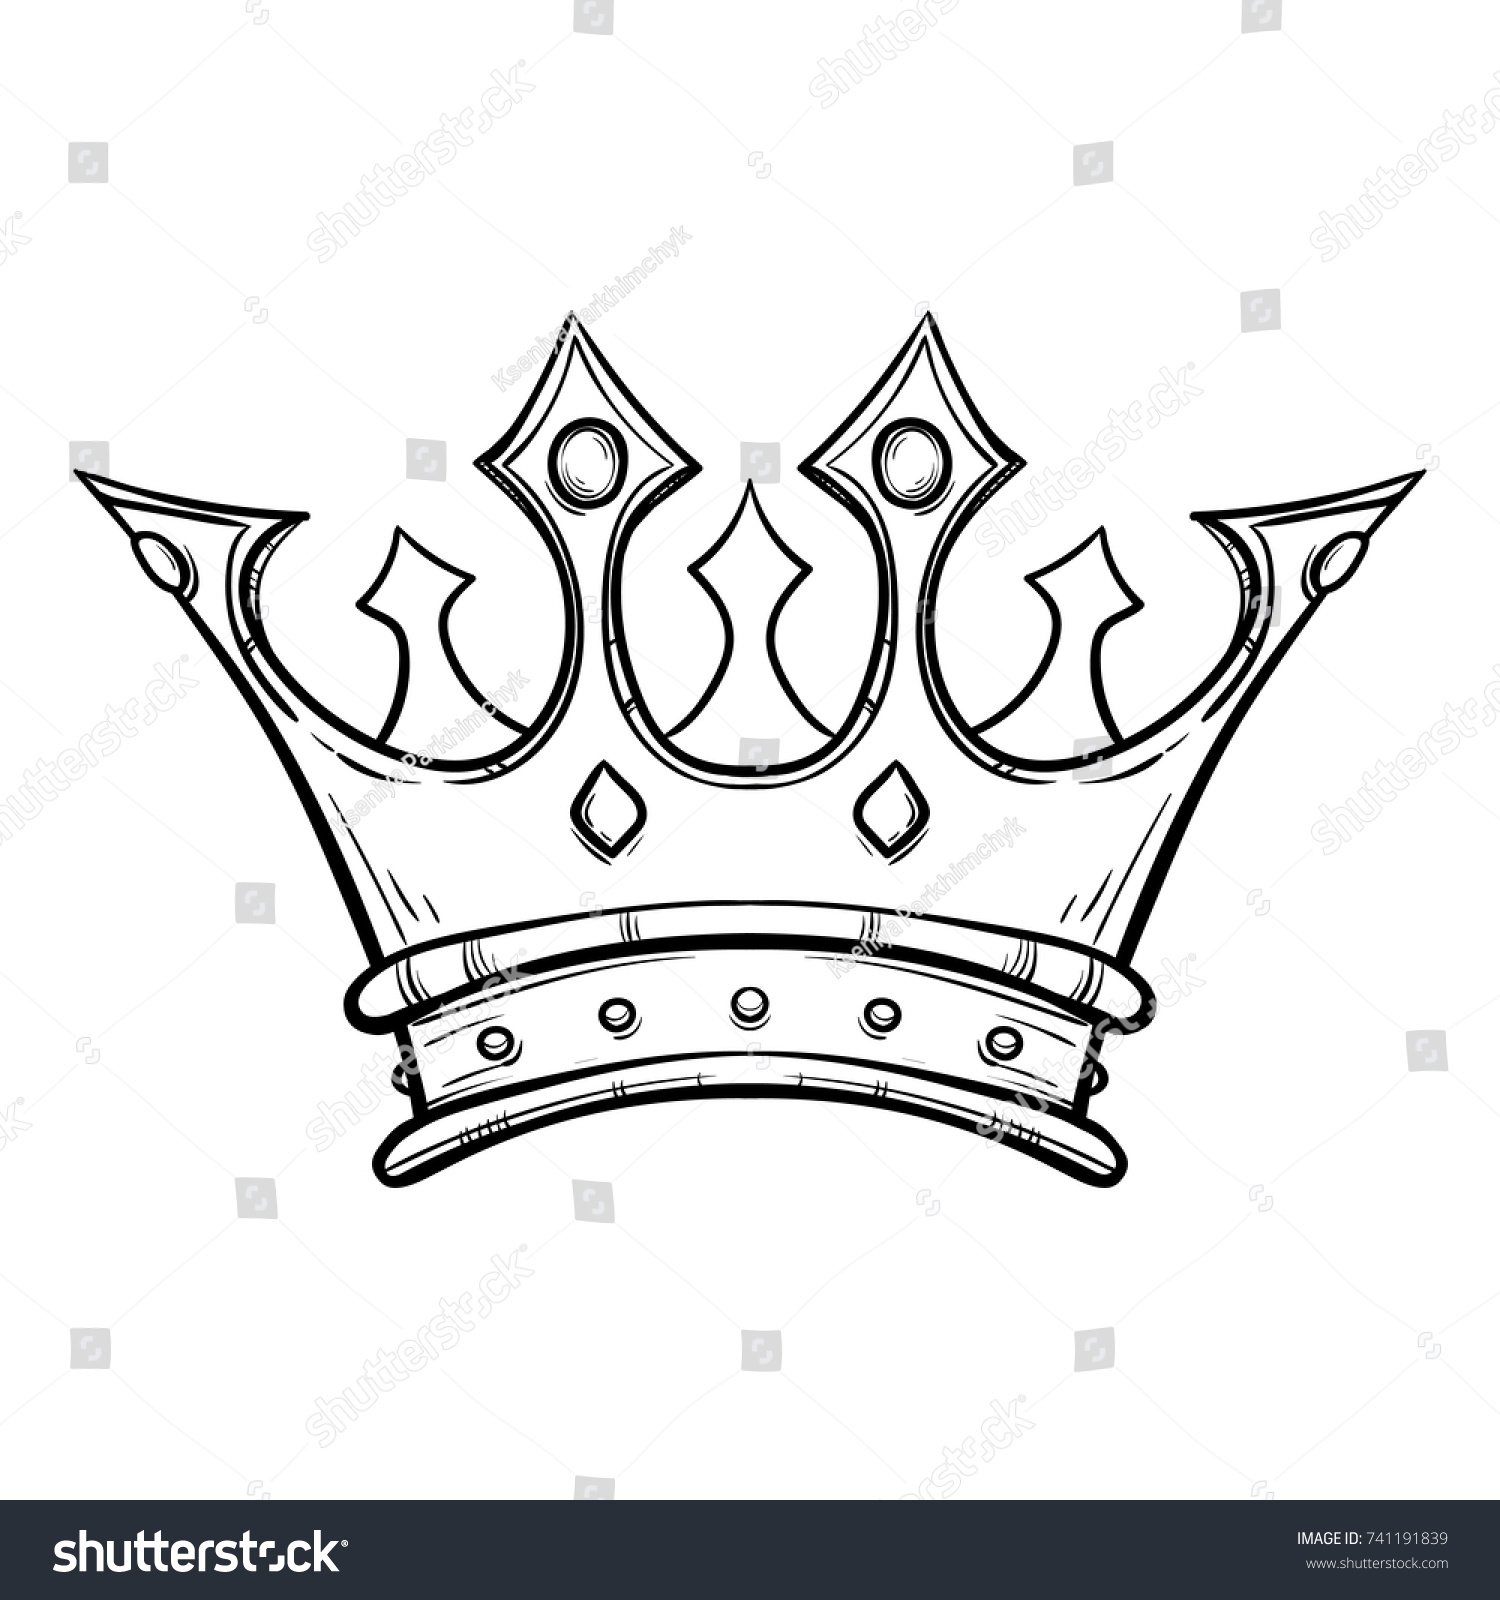 Golden King Crown Hand Drawn Vector Stock Vector (Royalty Free ...